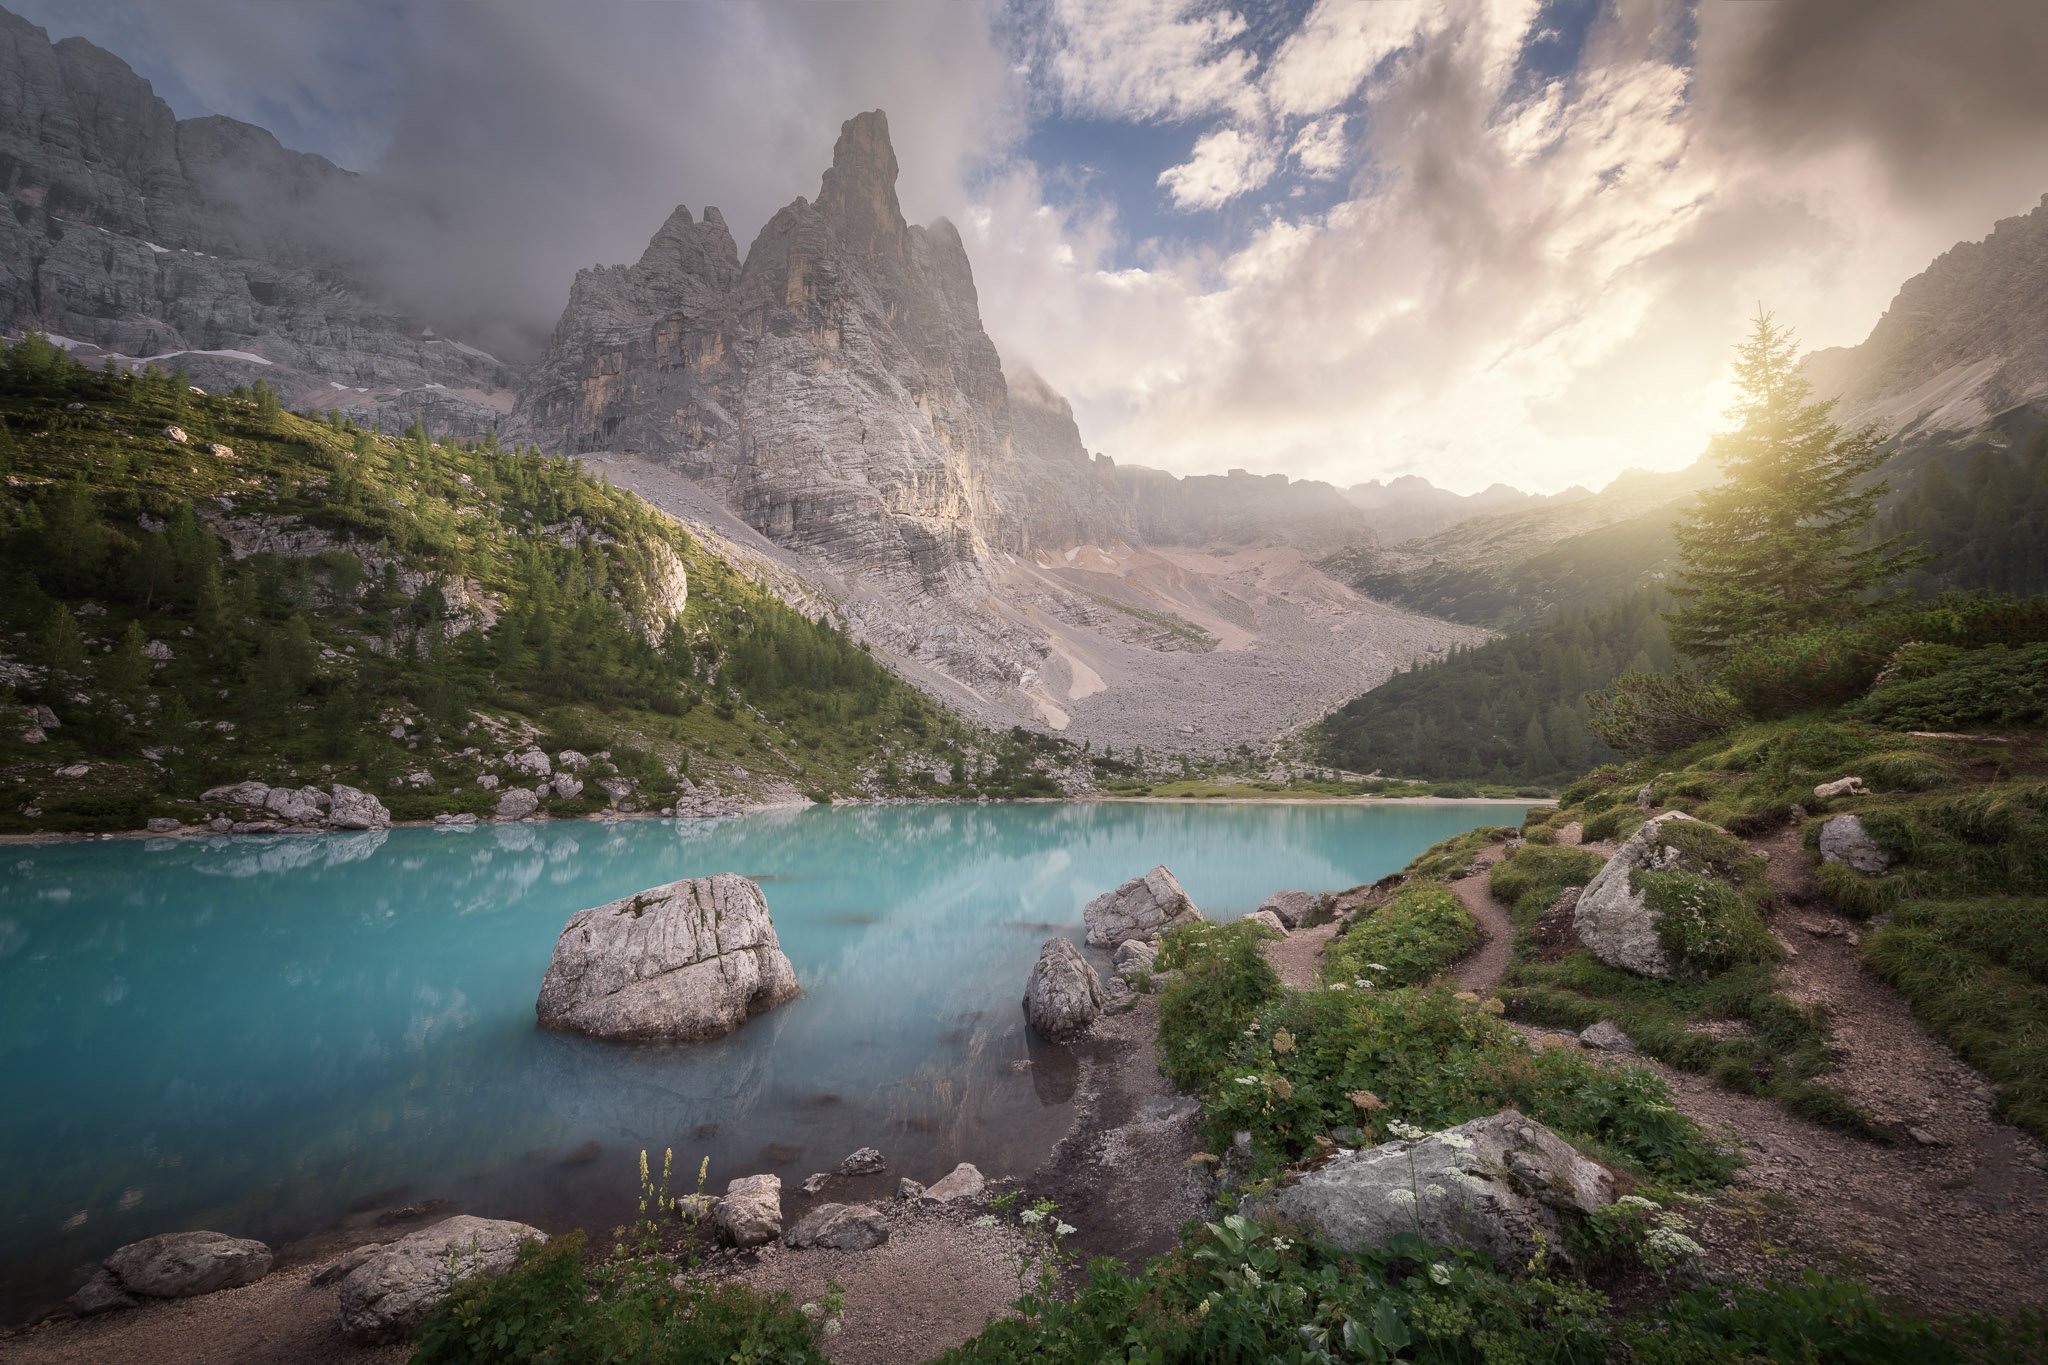 alpine, alps, beautiful, beauty, blue, calm, cyan, dolomites, europe, european, evening, flowers, forest, grass, green, hiking, italia, italian, italy, lago, lake, landscape, mountain, mountains, natural, nature, outdoor, park, peak, pine, reflection, roc, Andrey Omelyanchuk